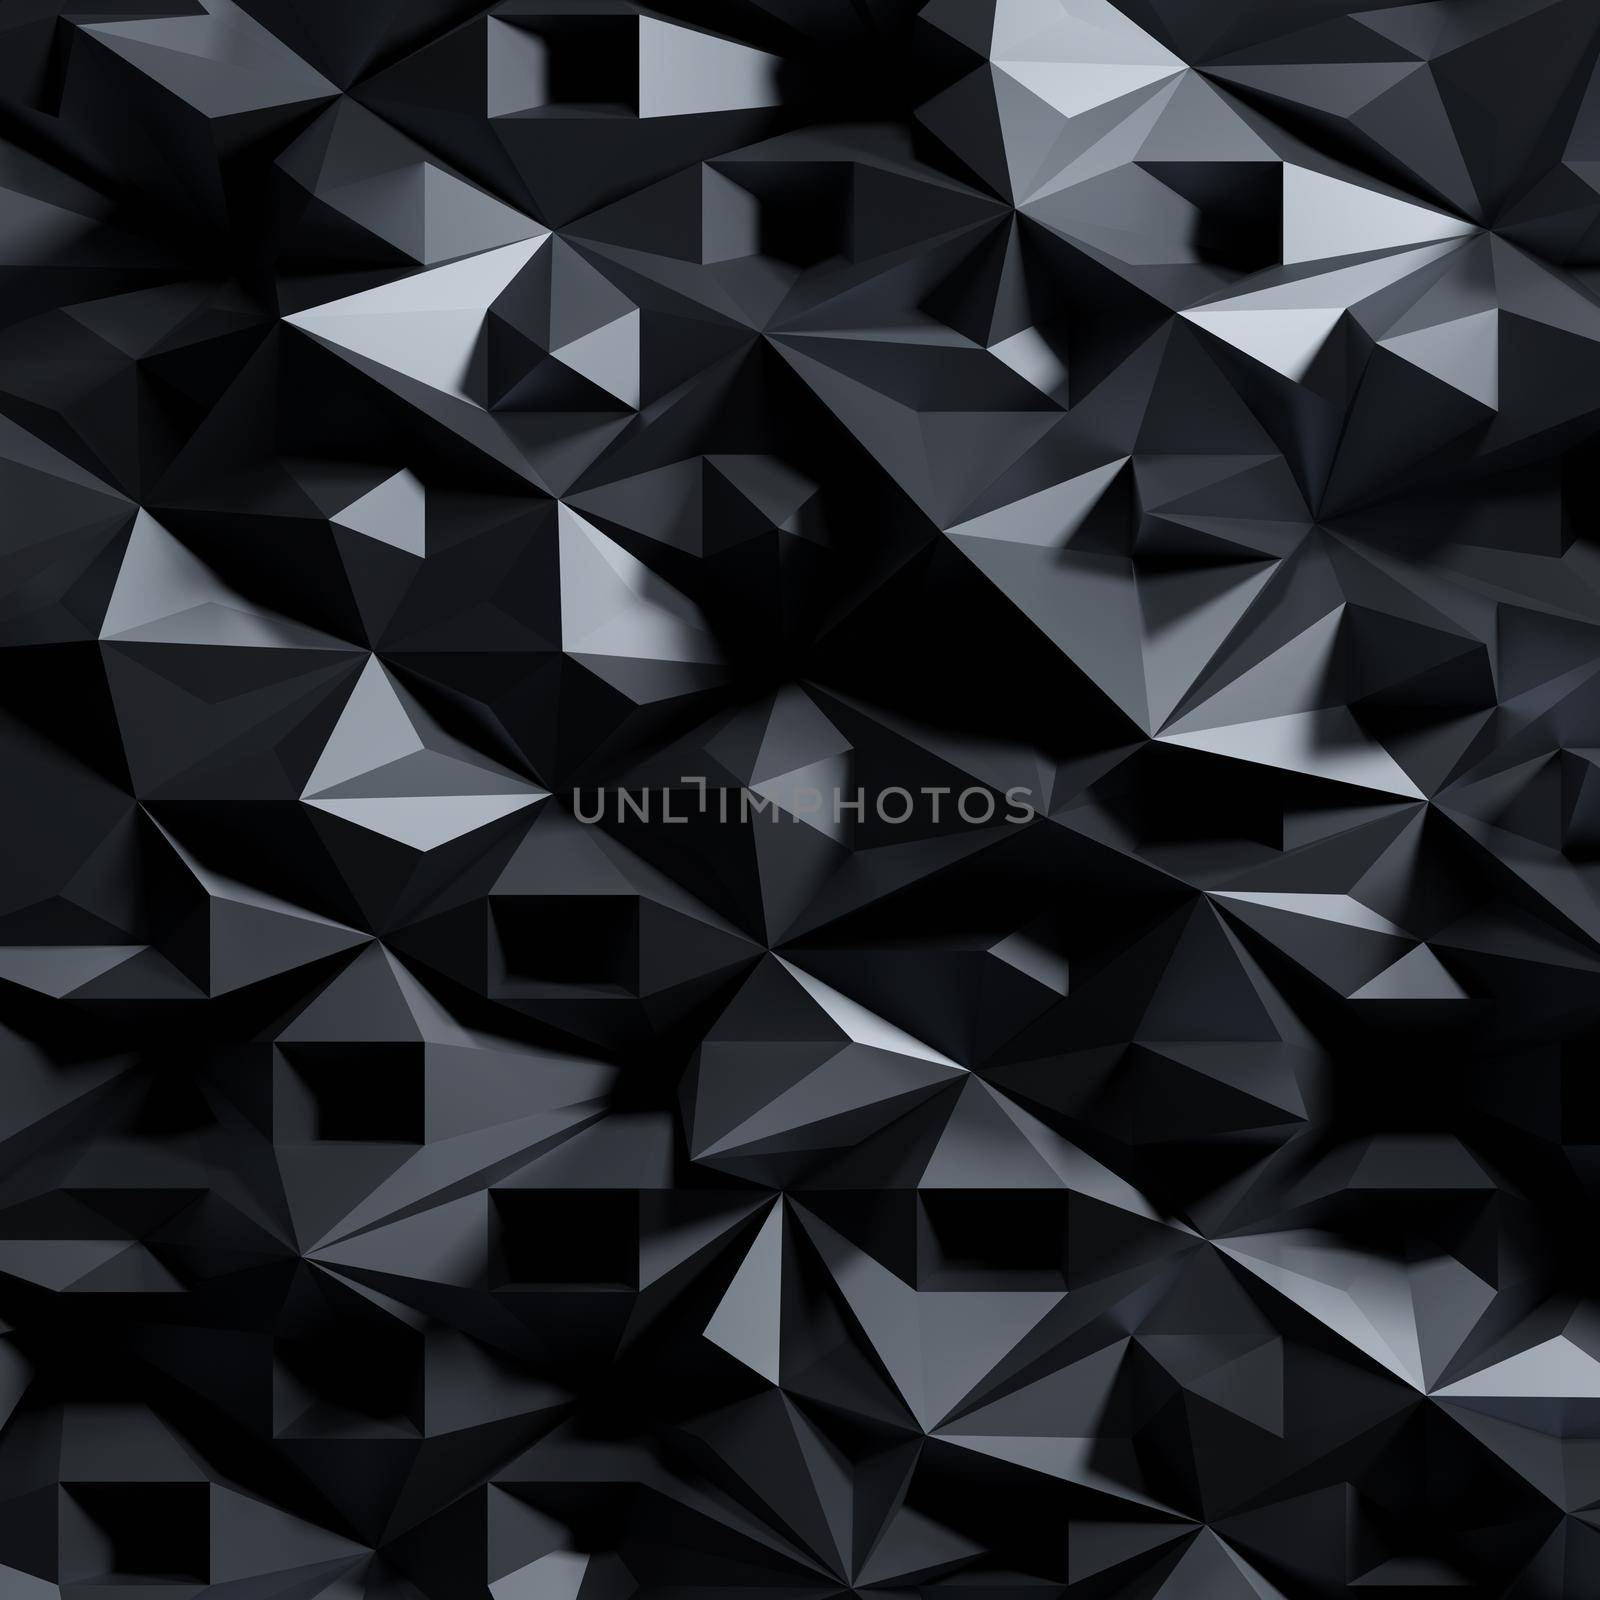 Abstract industrial background and stainless steel texture. 3d rendering